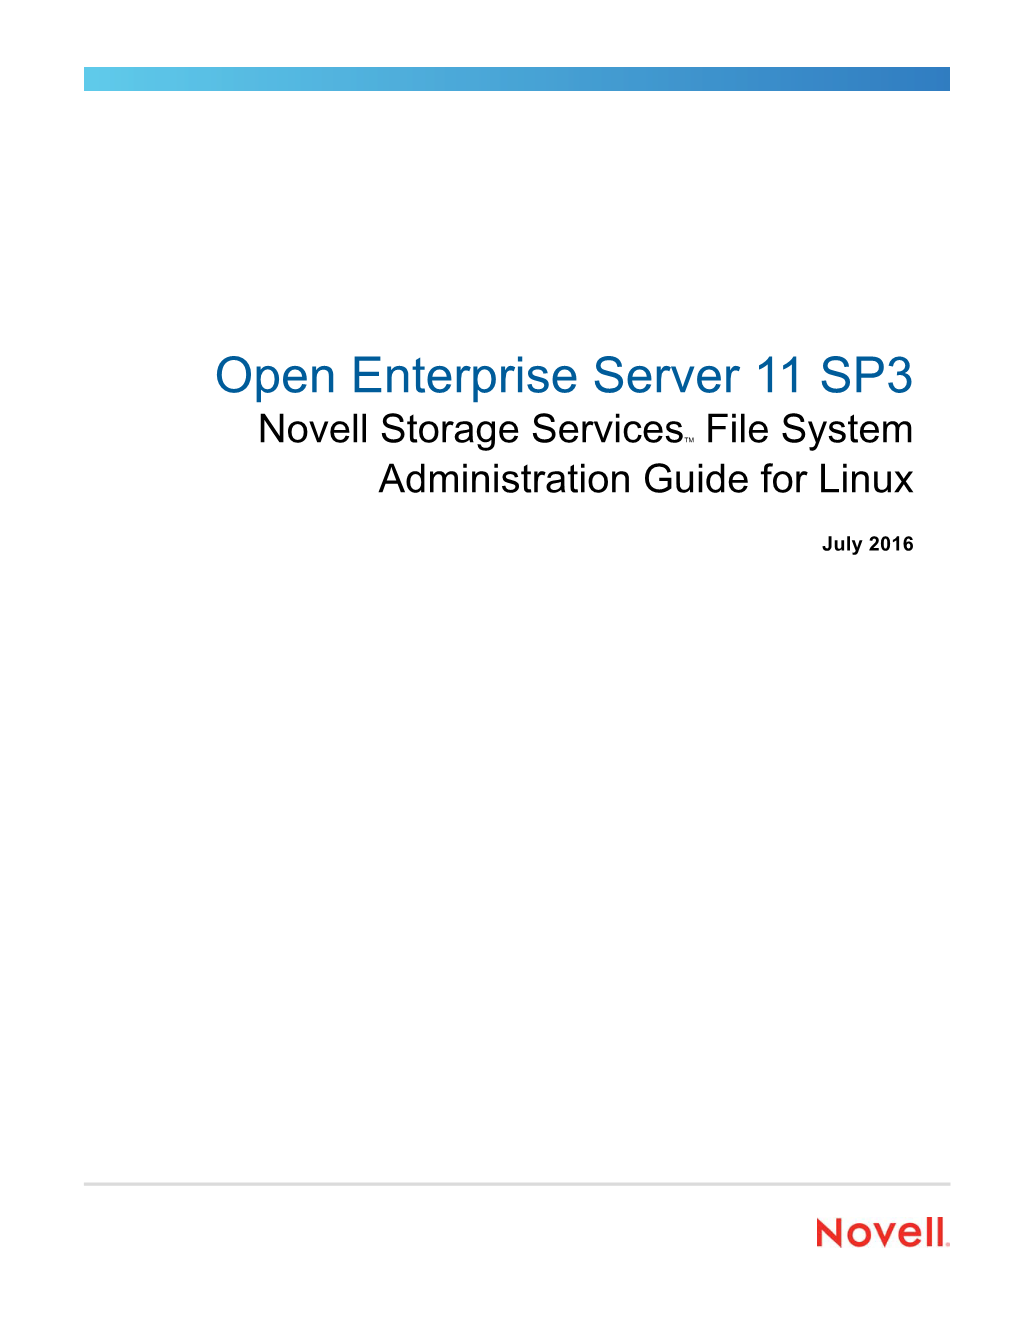 NSS File System Administration Guide for Linux Is Available on the OES Documentation Website